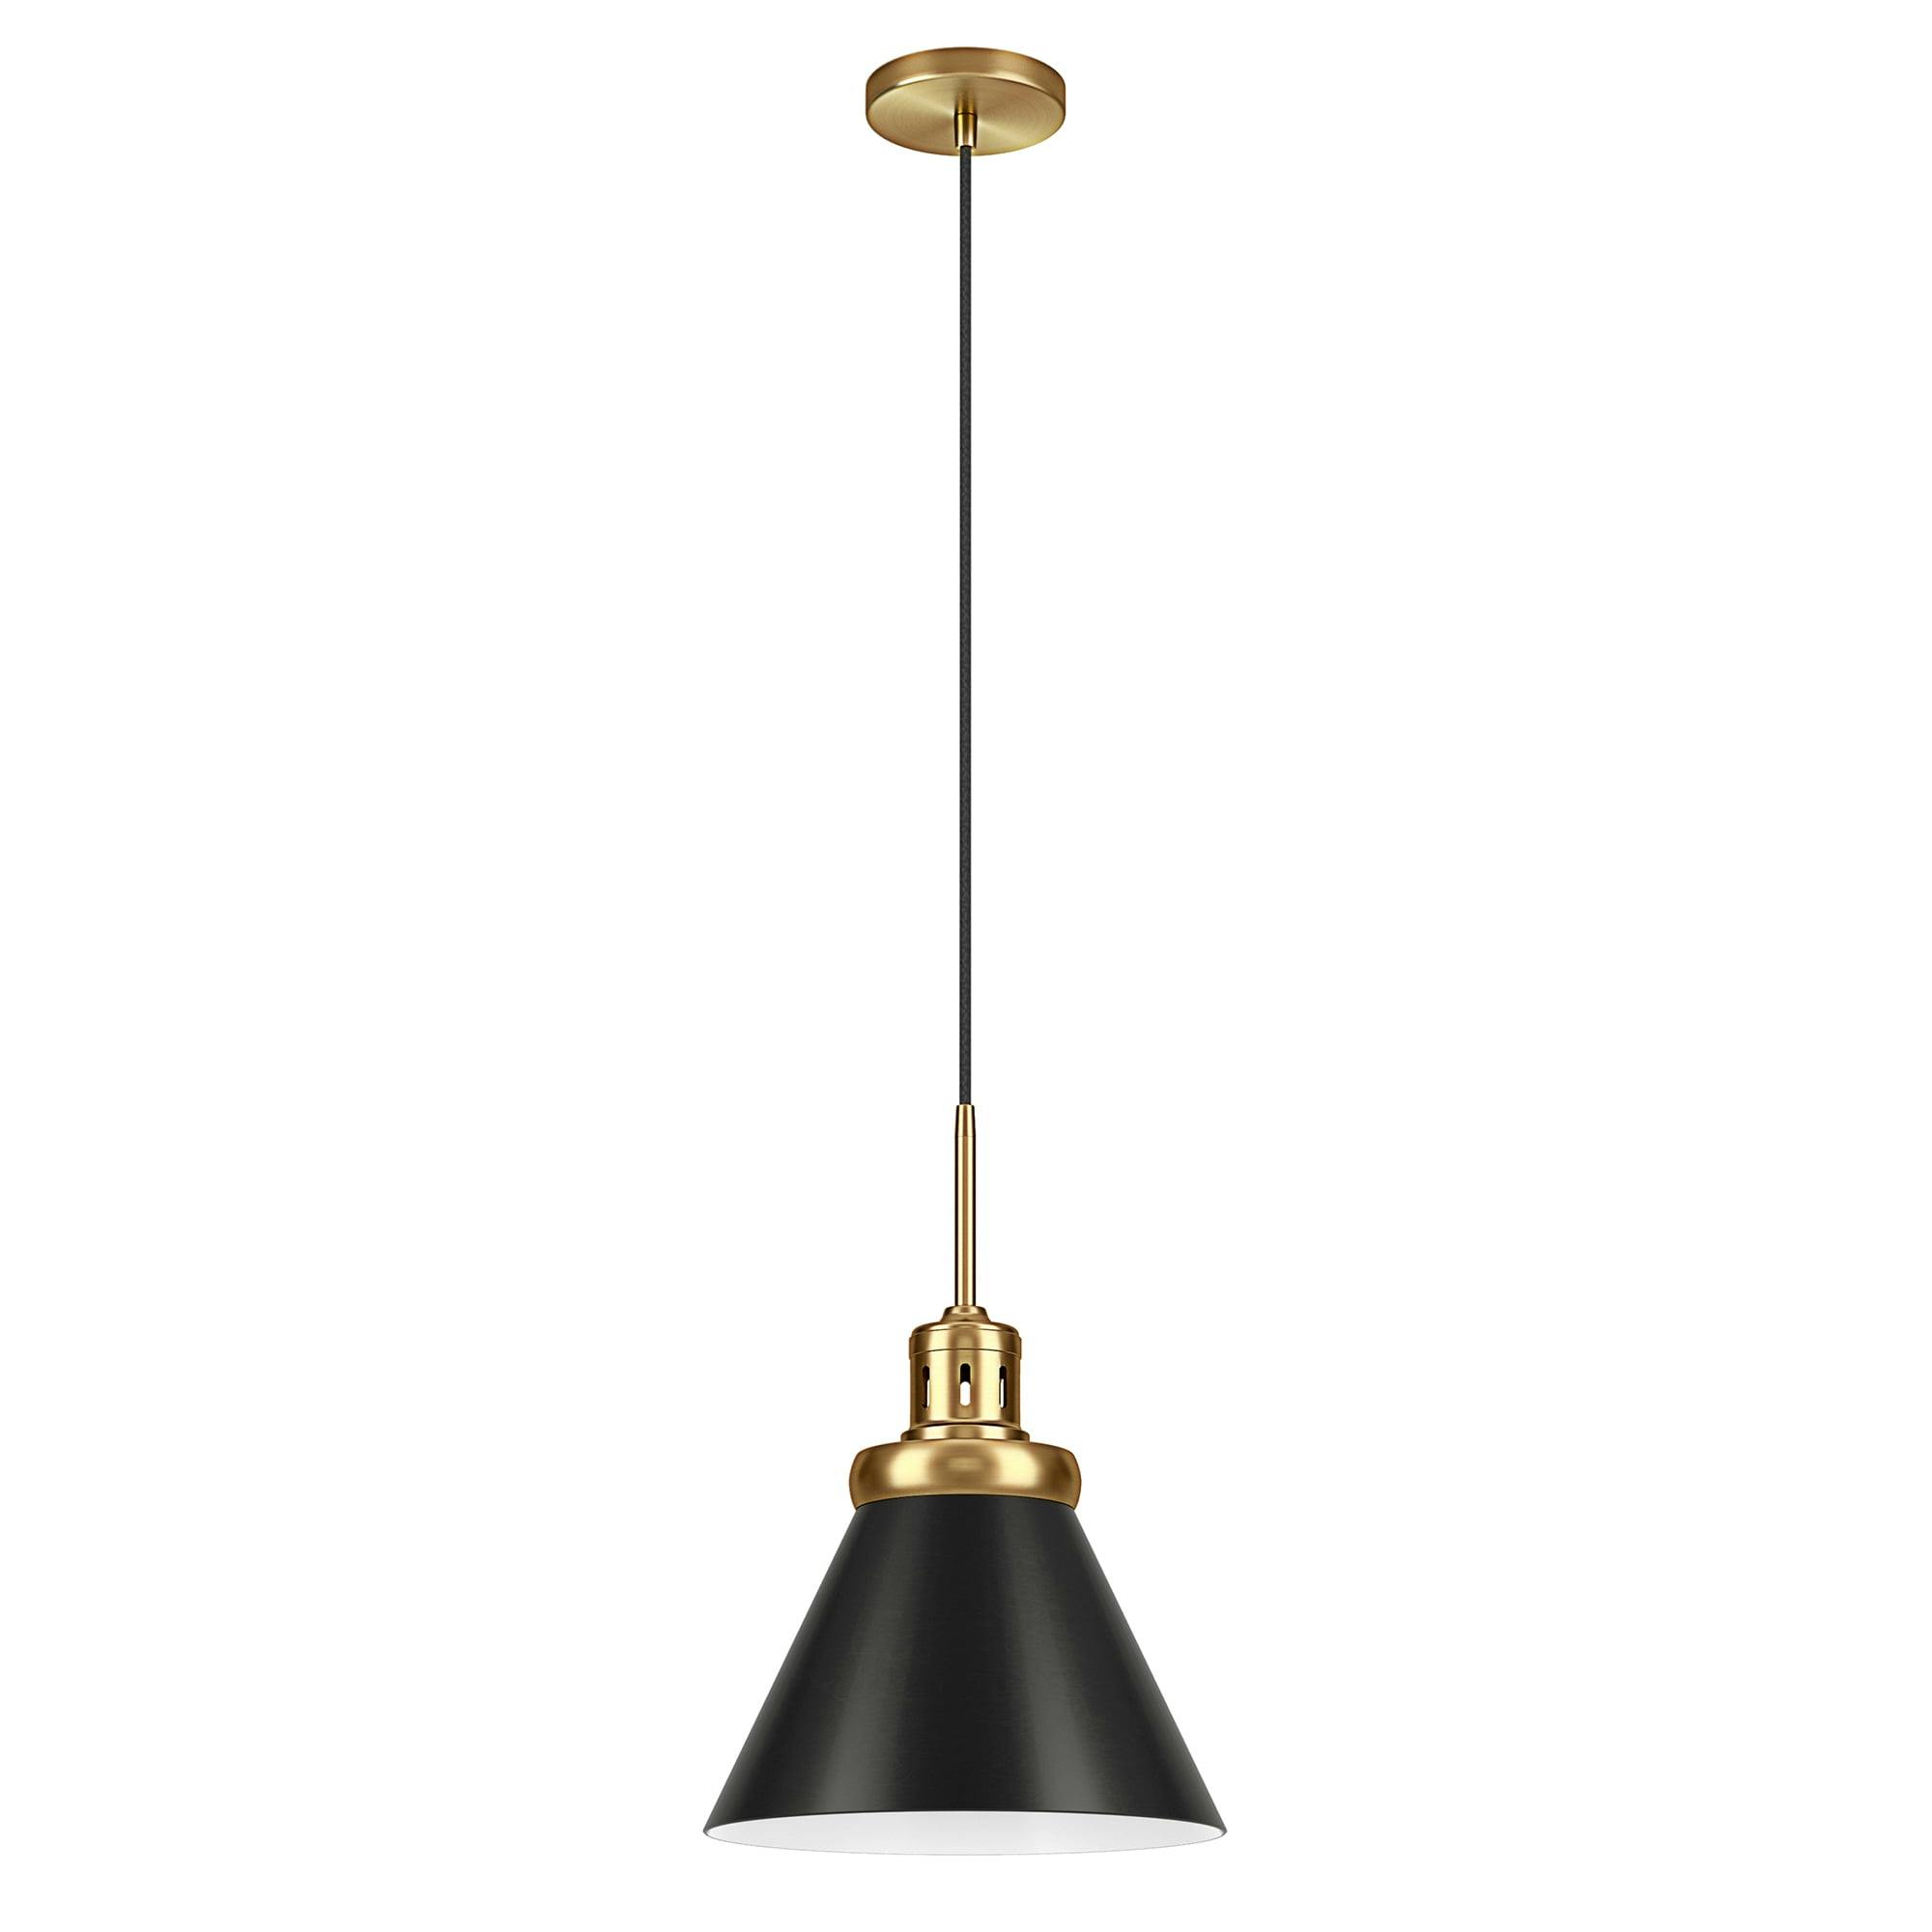 Zeno 12" Industrial Cone-Shaped Pendant - Brushed Brass and Blackened Bronze